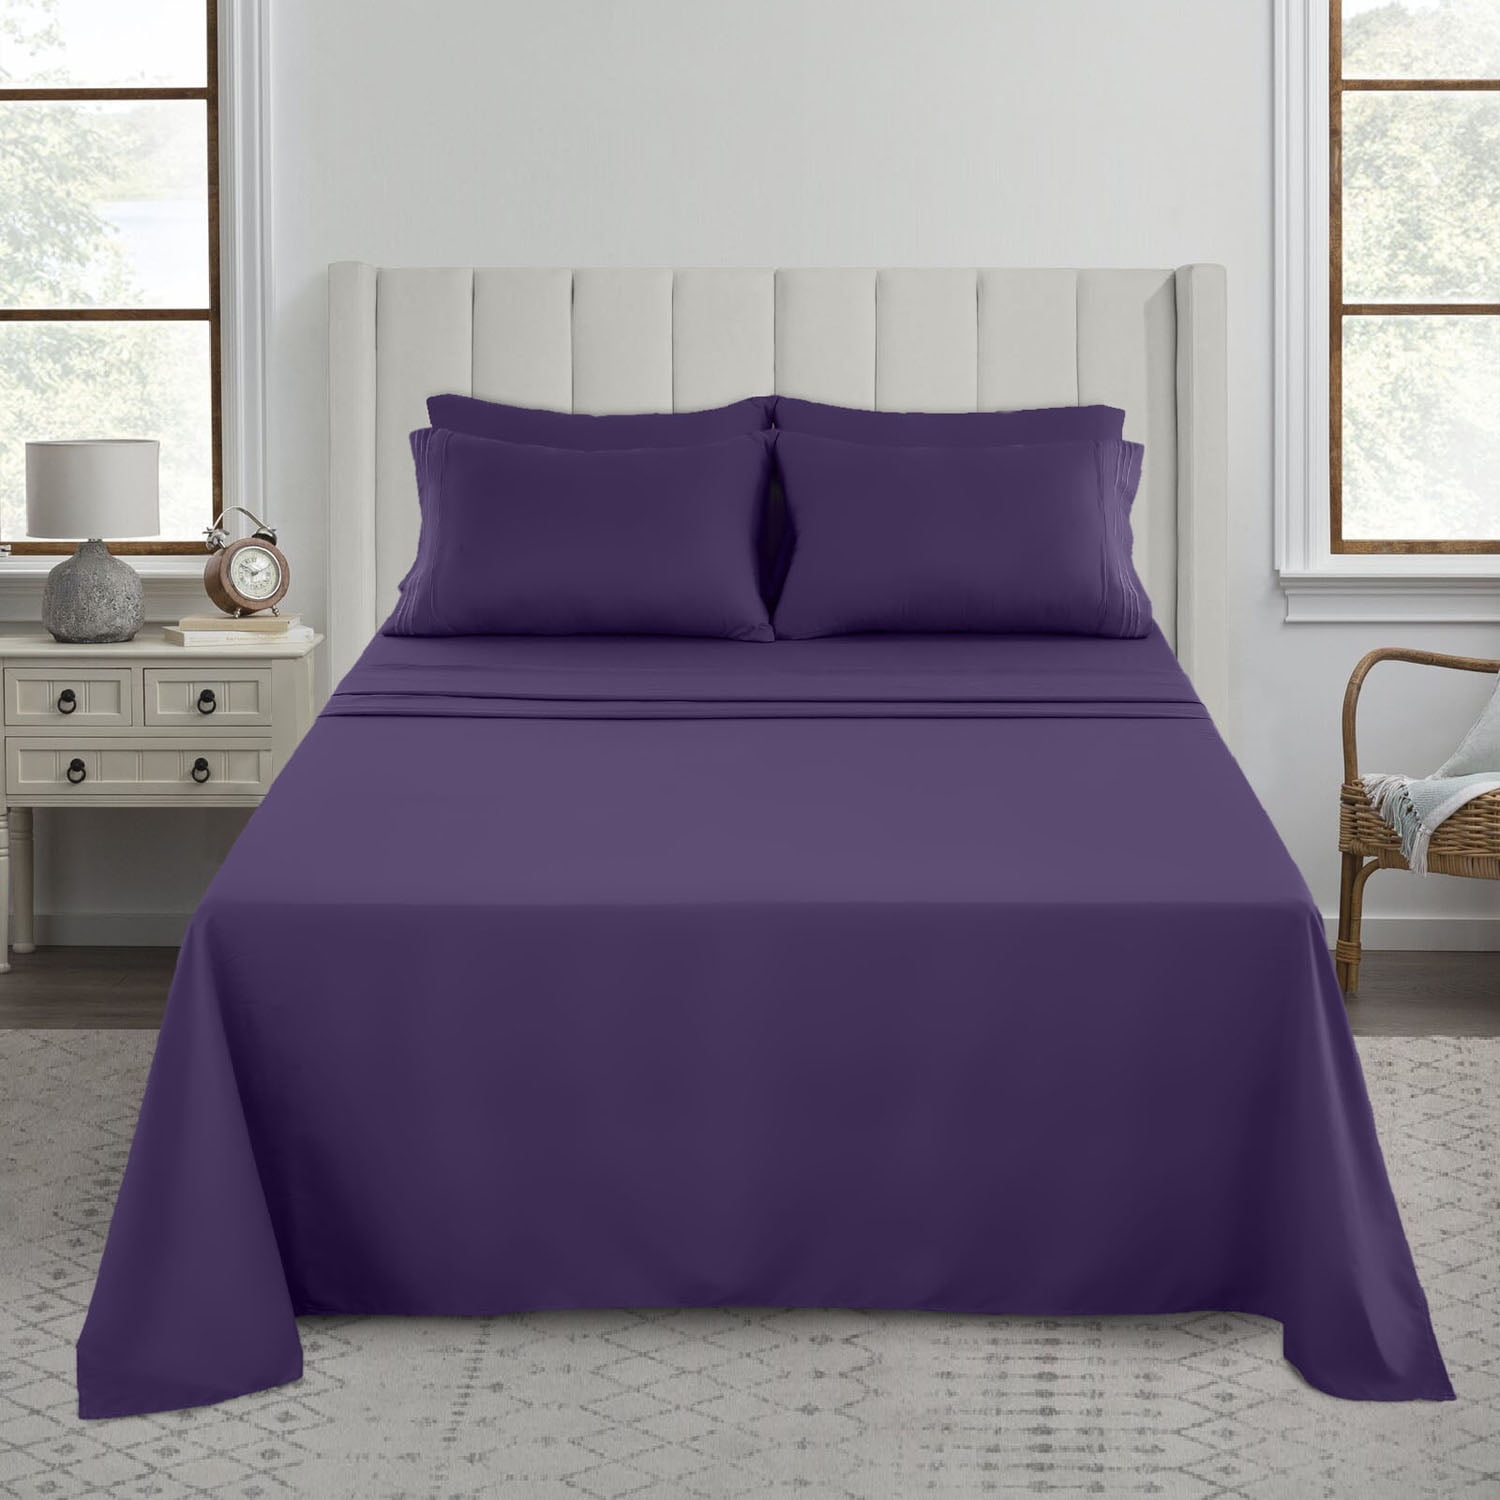 21 Colors Available! 6 Piece 1800 Count Bed Sheet Set Extra Deep Pocket Sheets 